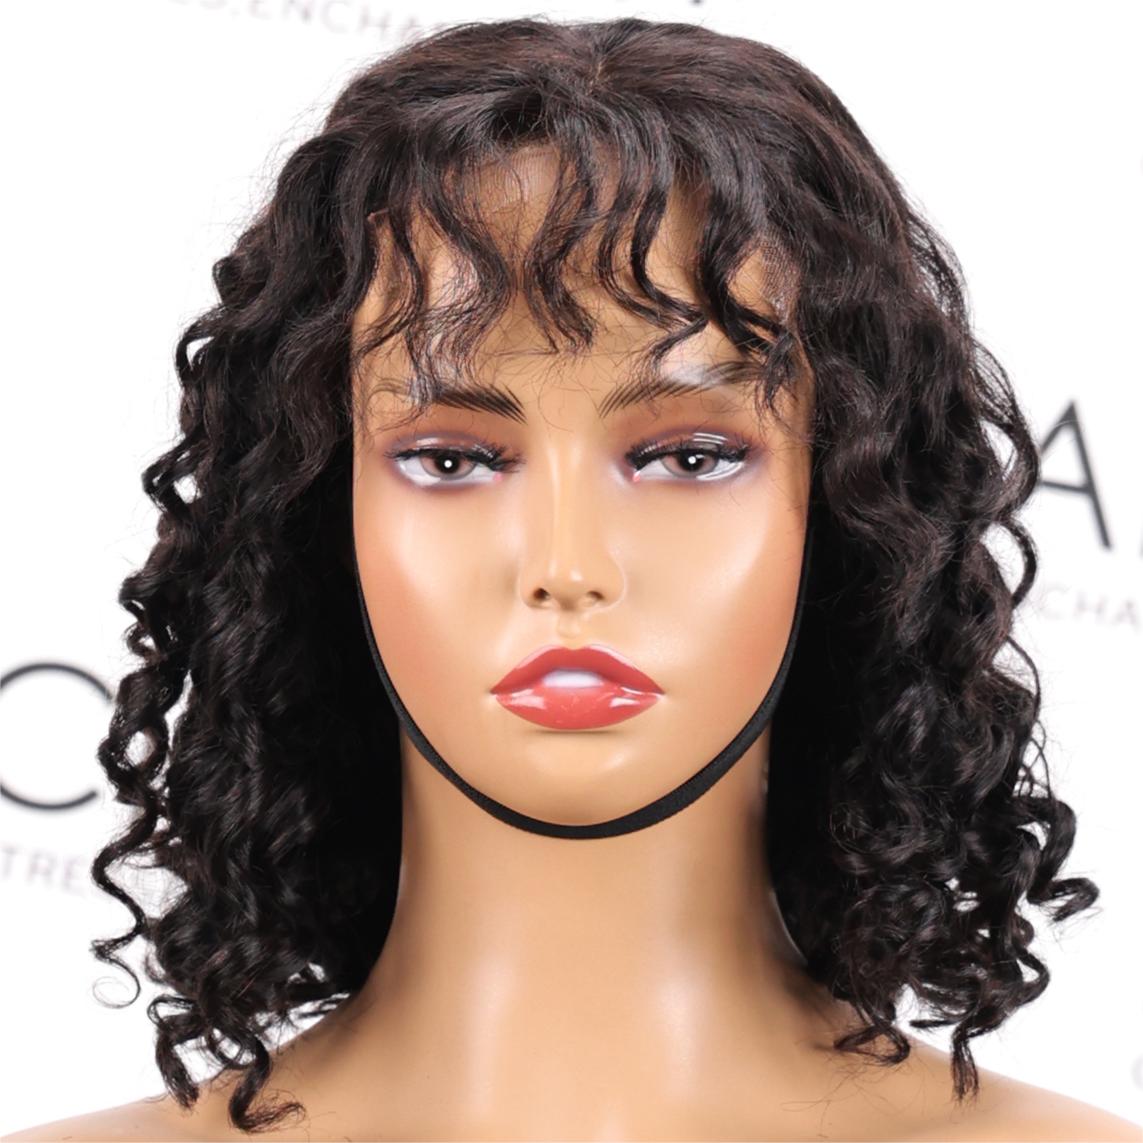 ONLY $69 Beginner Friendly Water Wave BOB Lace Wig with Bangs - 100% Human Hair